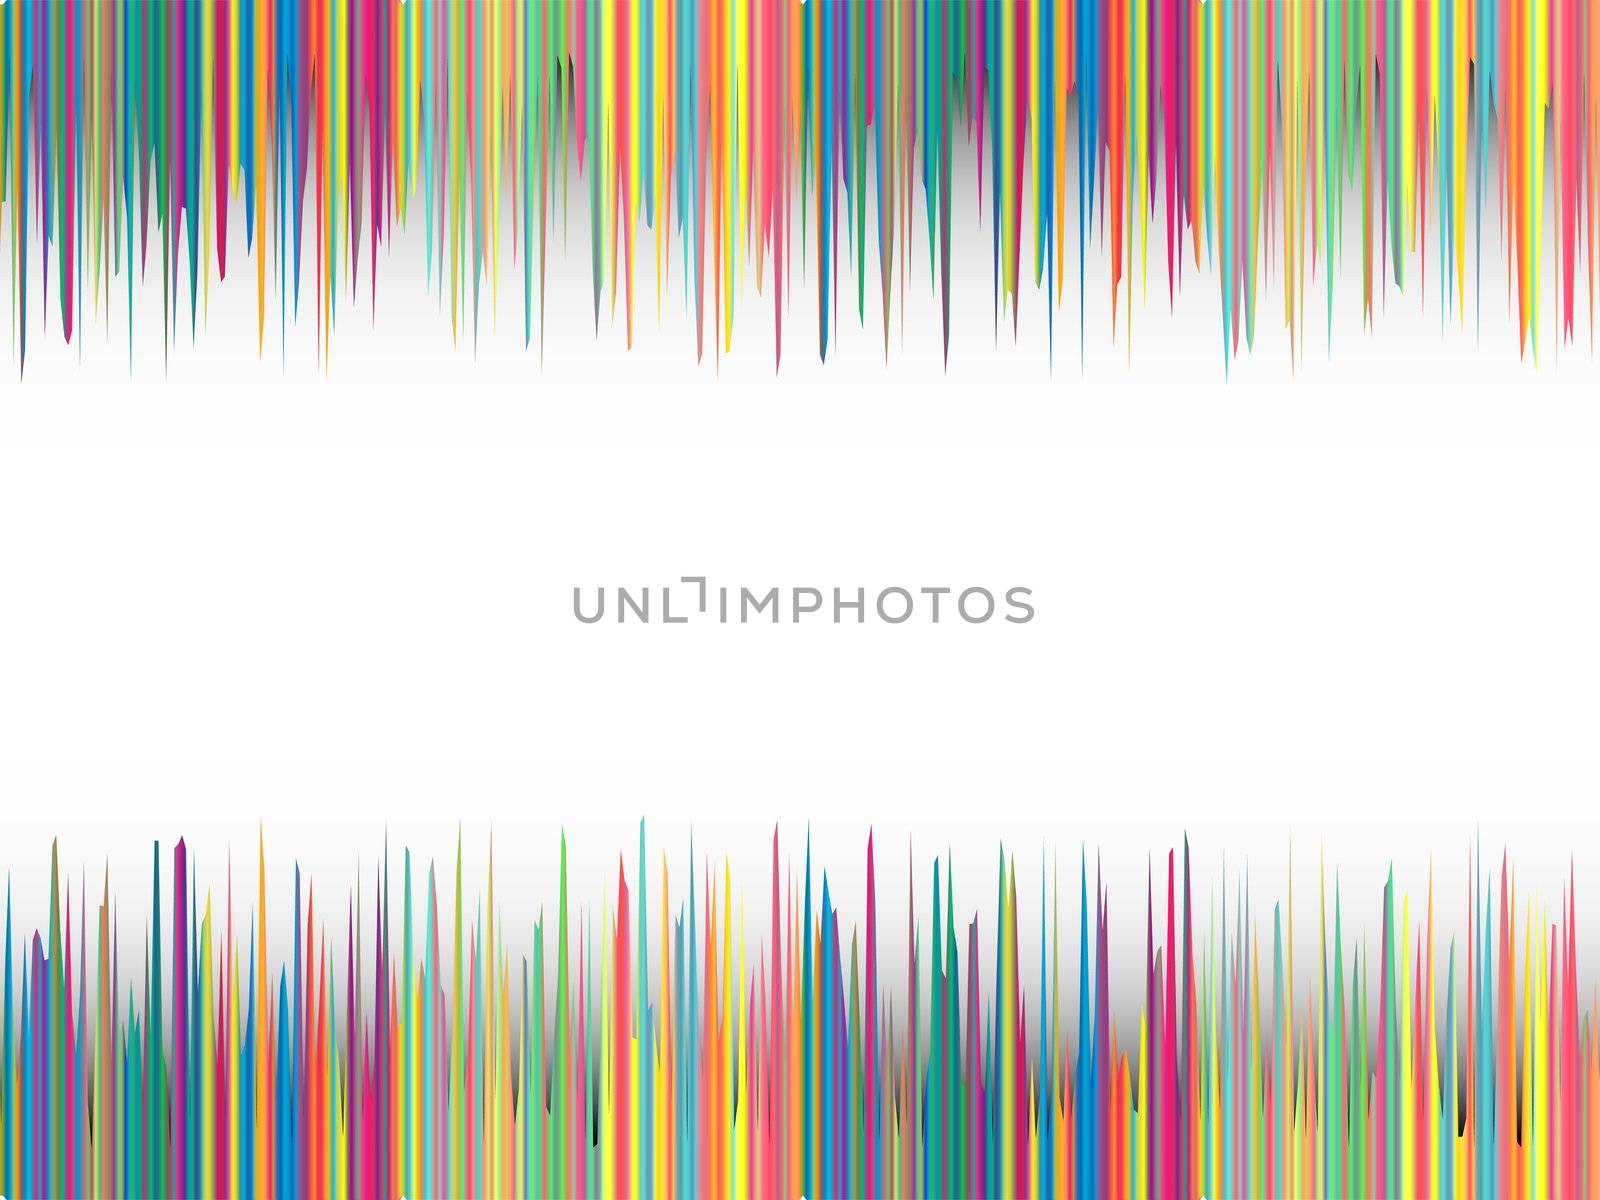 colorful striped background by robertosch